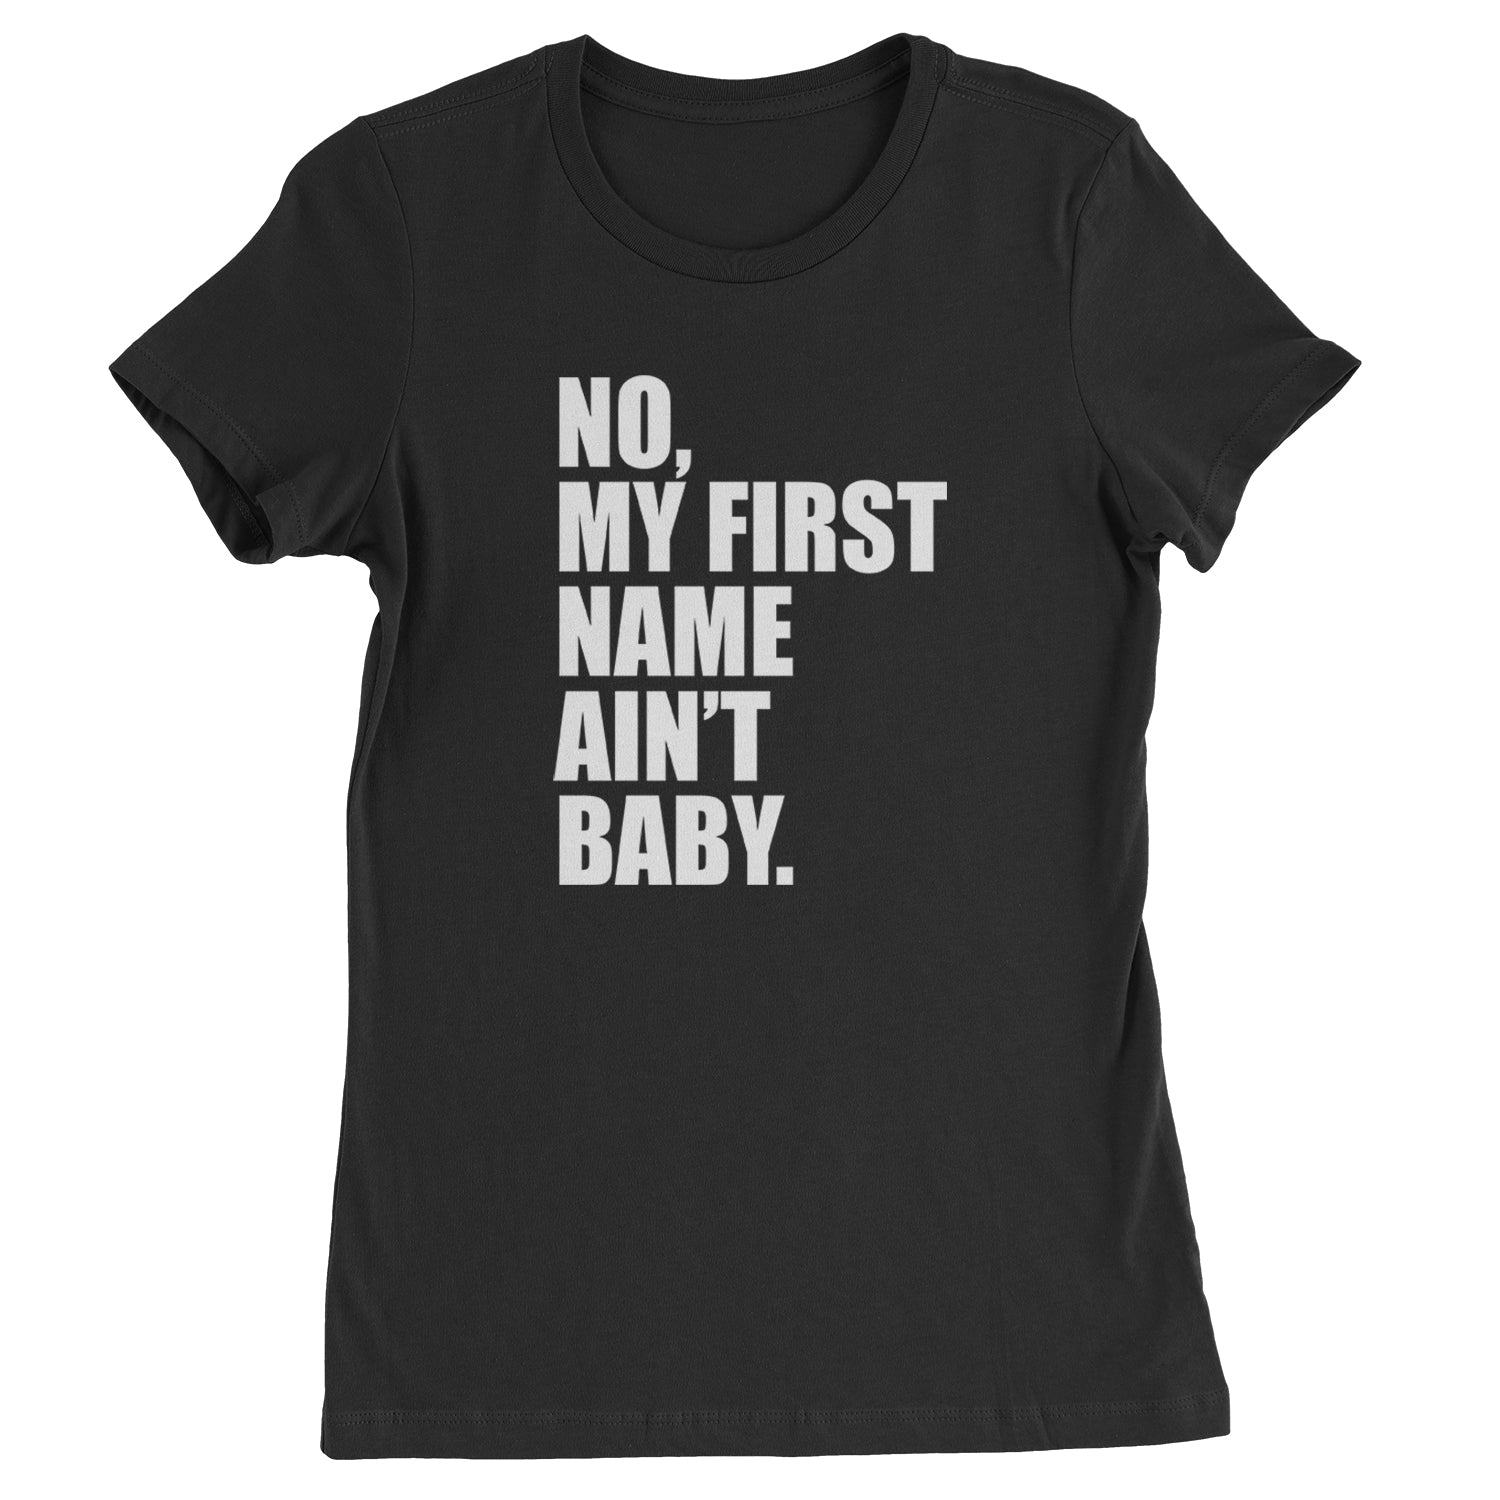 No My First Name Ain't Baby Together Again Womens T-shirt